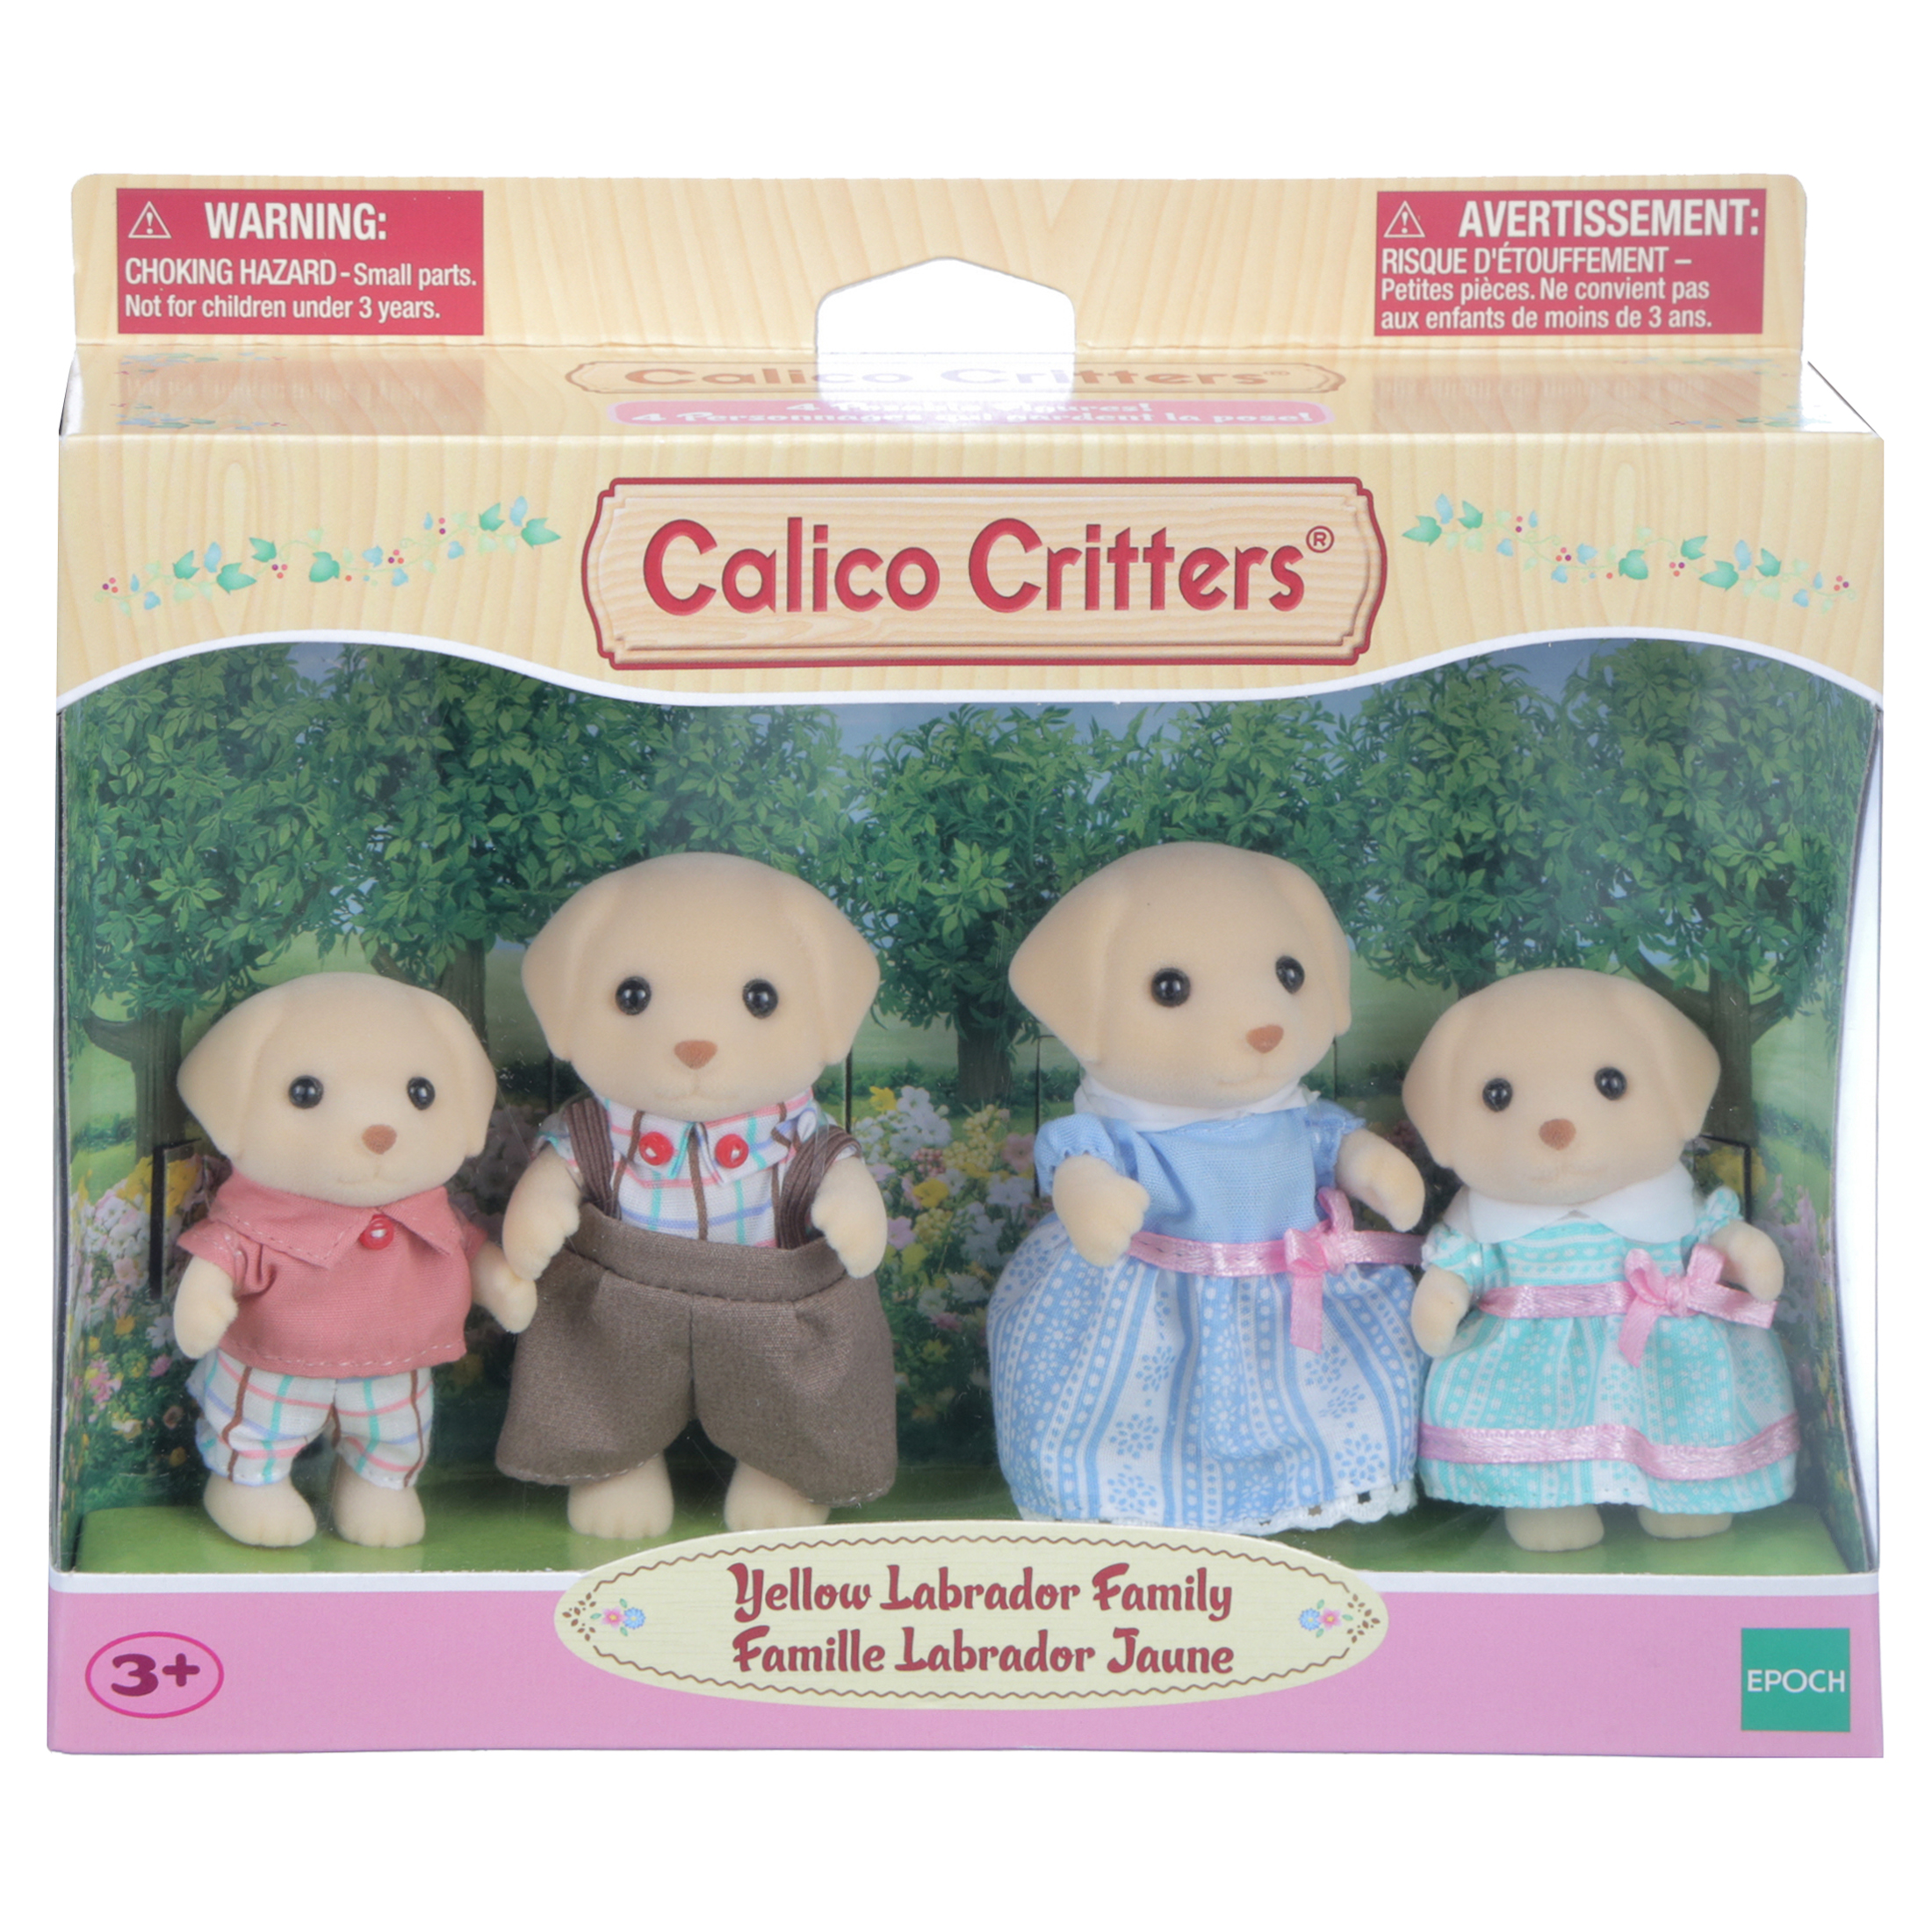 Calico Critters Yellow Labrador Family Action Figure Set, 4 Pieces - image 2 of 2